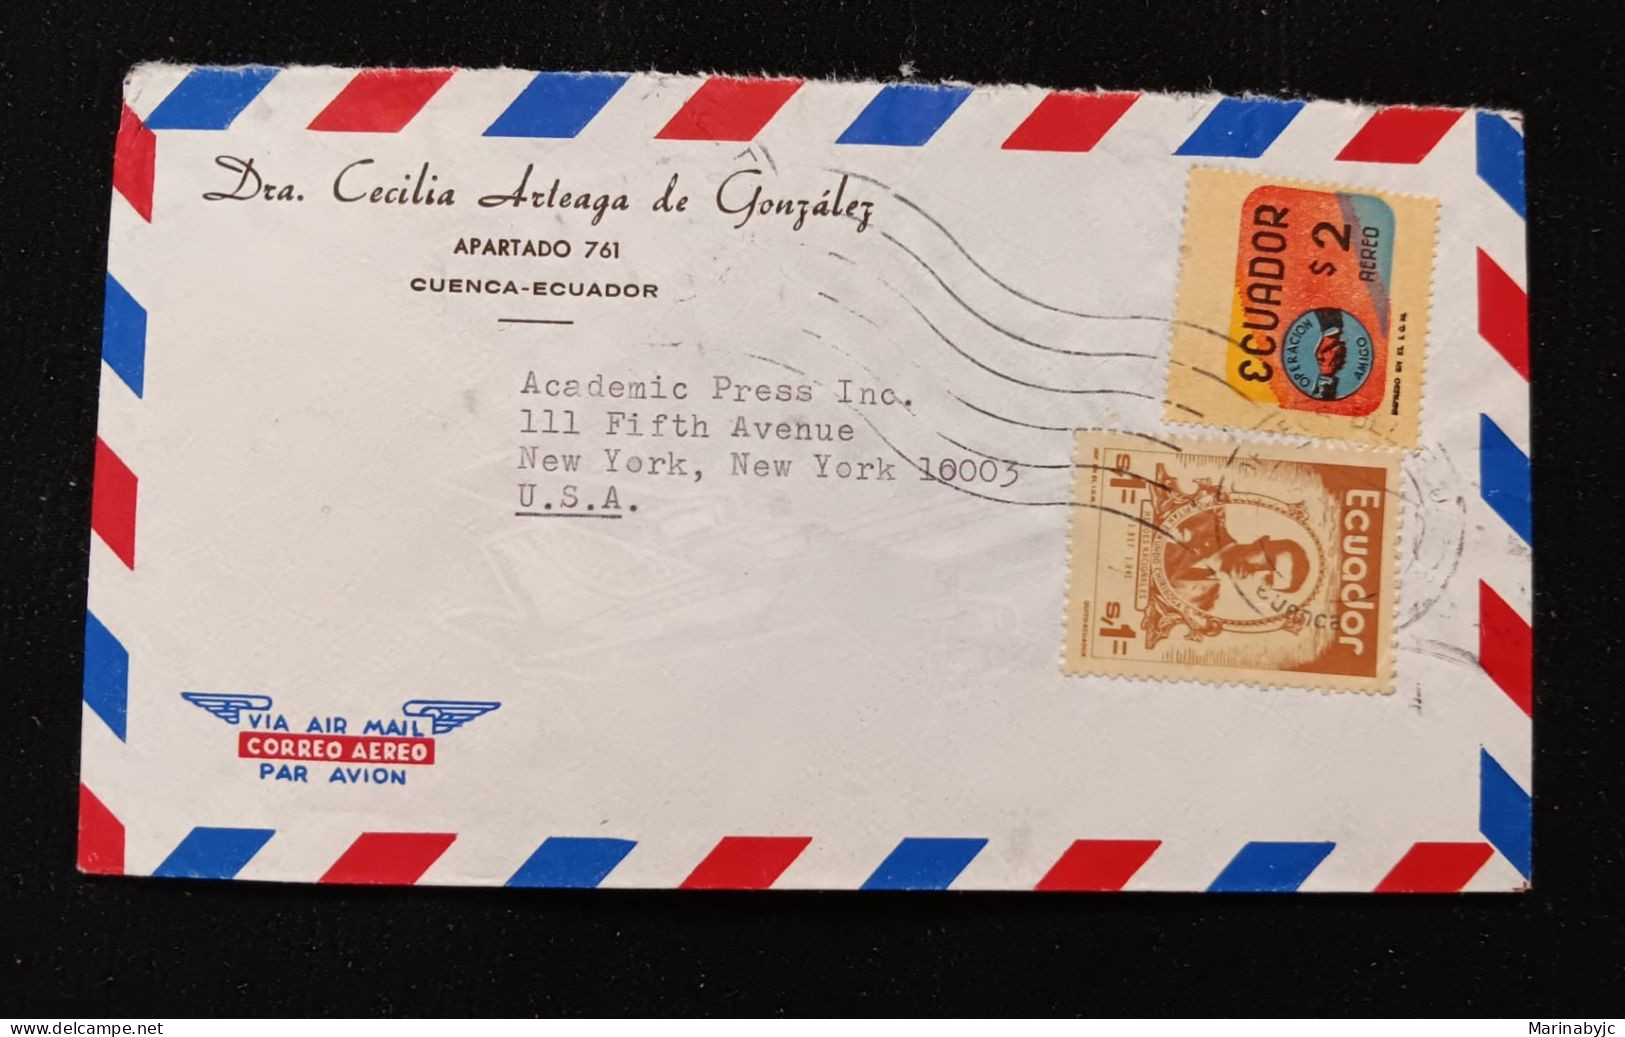 C) 1941, ECUADOR, AIR MAIL, DOUBLE STAMPED ENVELOPE SENT TO THE UNITED STATES. XF - Equateur